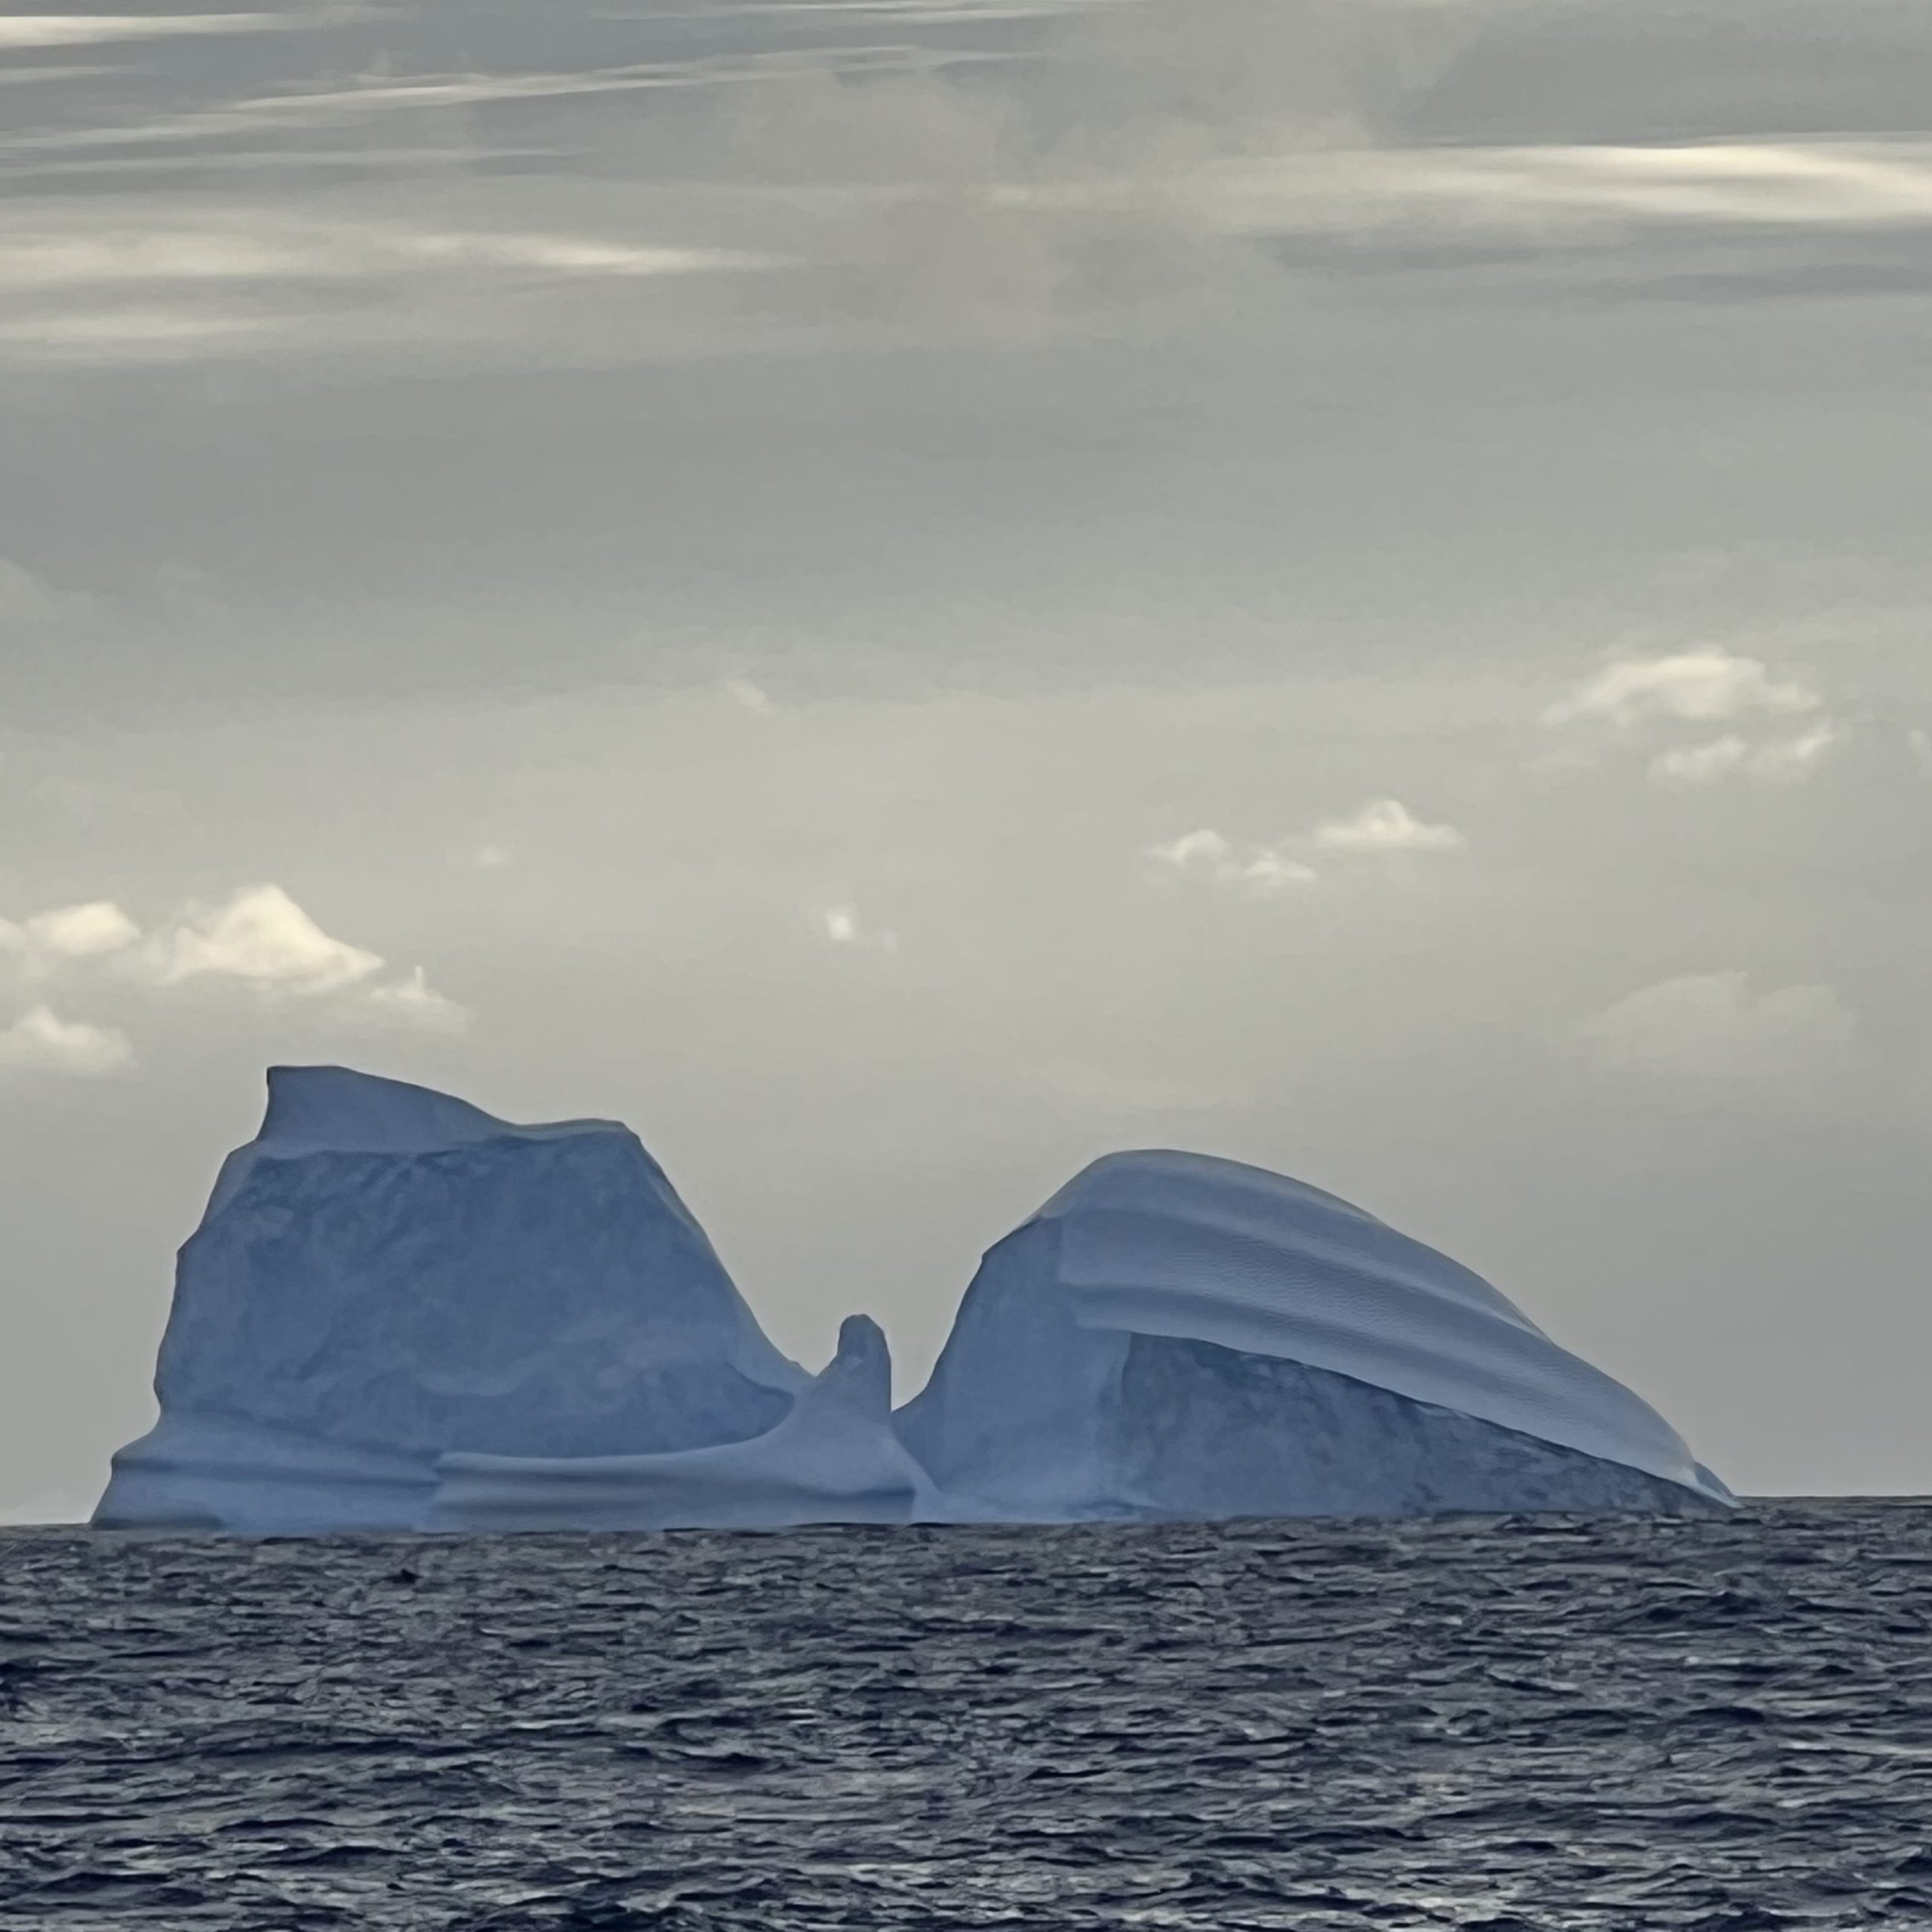 One of the last icebergs viewed by the Langseth, from the starboard side of the ship.